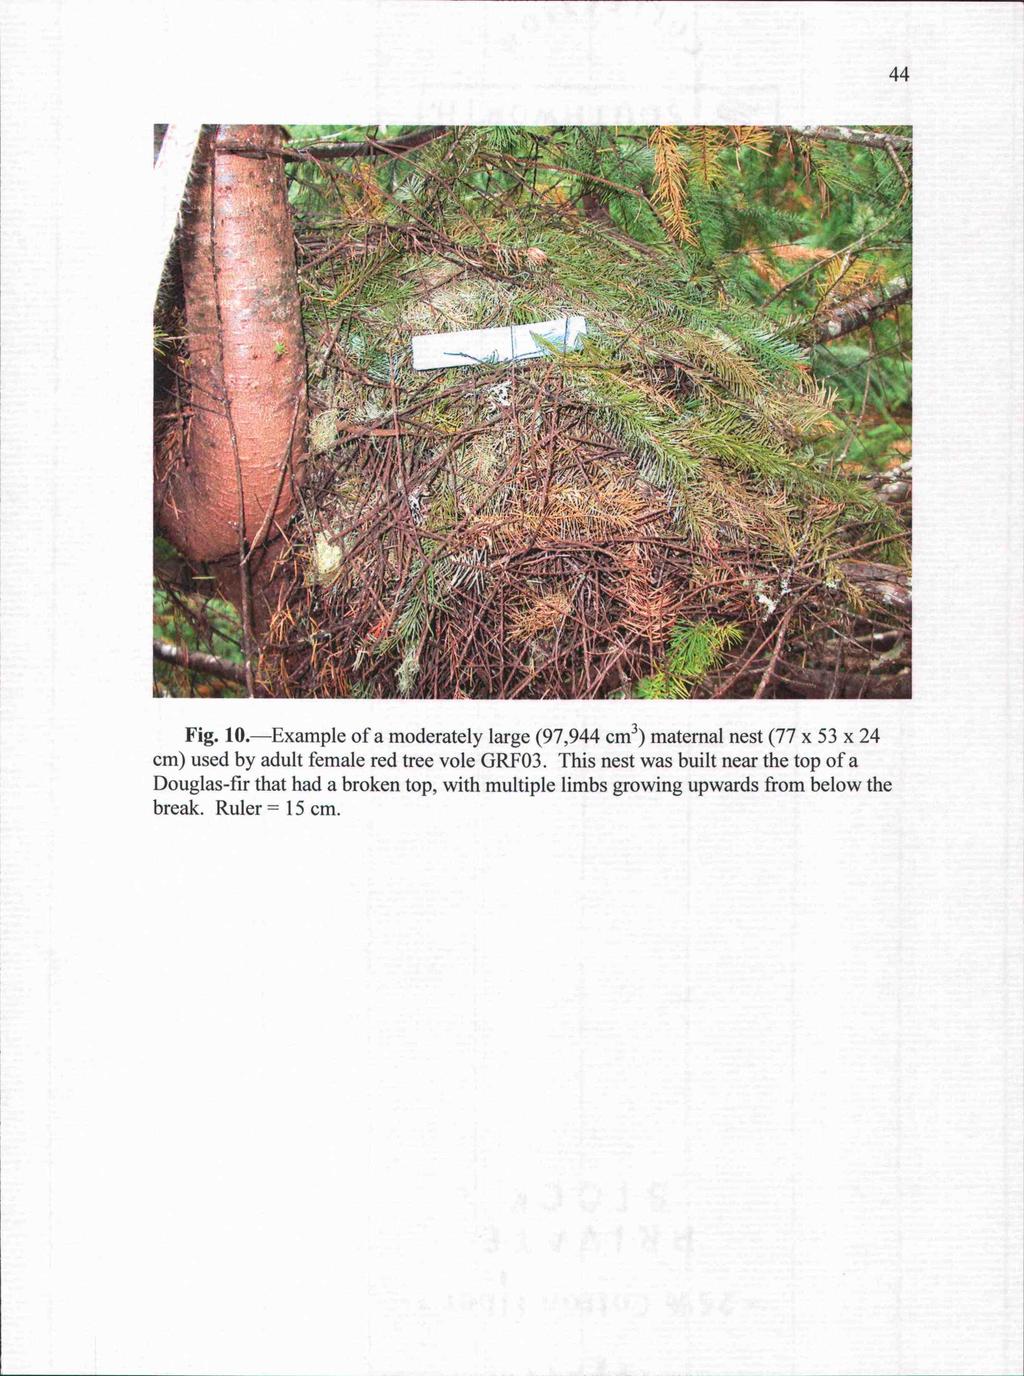 Fig. 10.Example of a moderately large (97,944 cm3) maternal nest (77 x 53 x 24 cm) used by adult female red tree vole GRFO3.